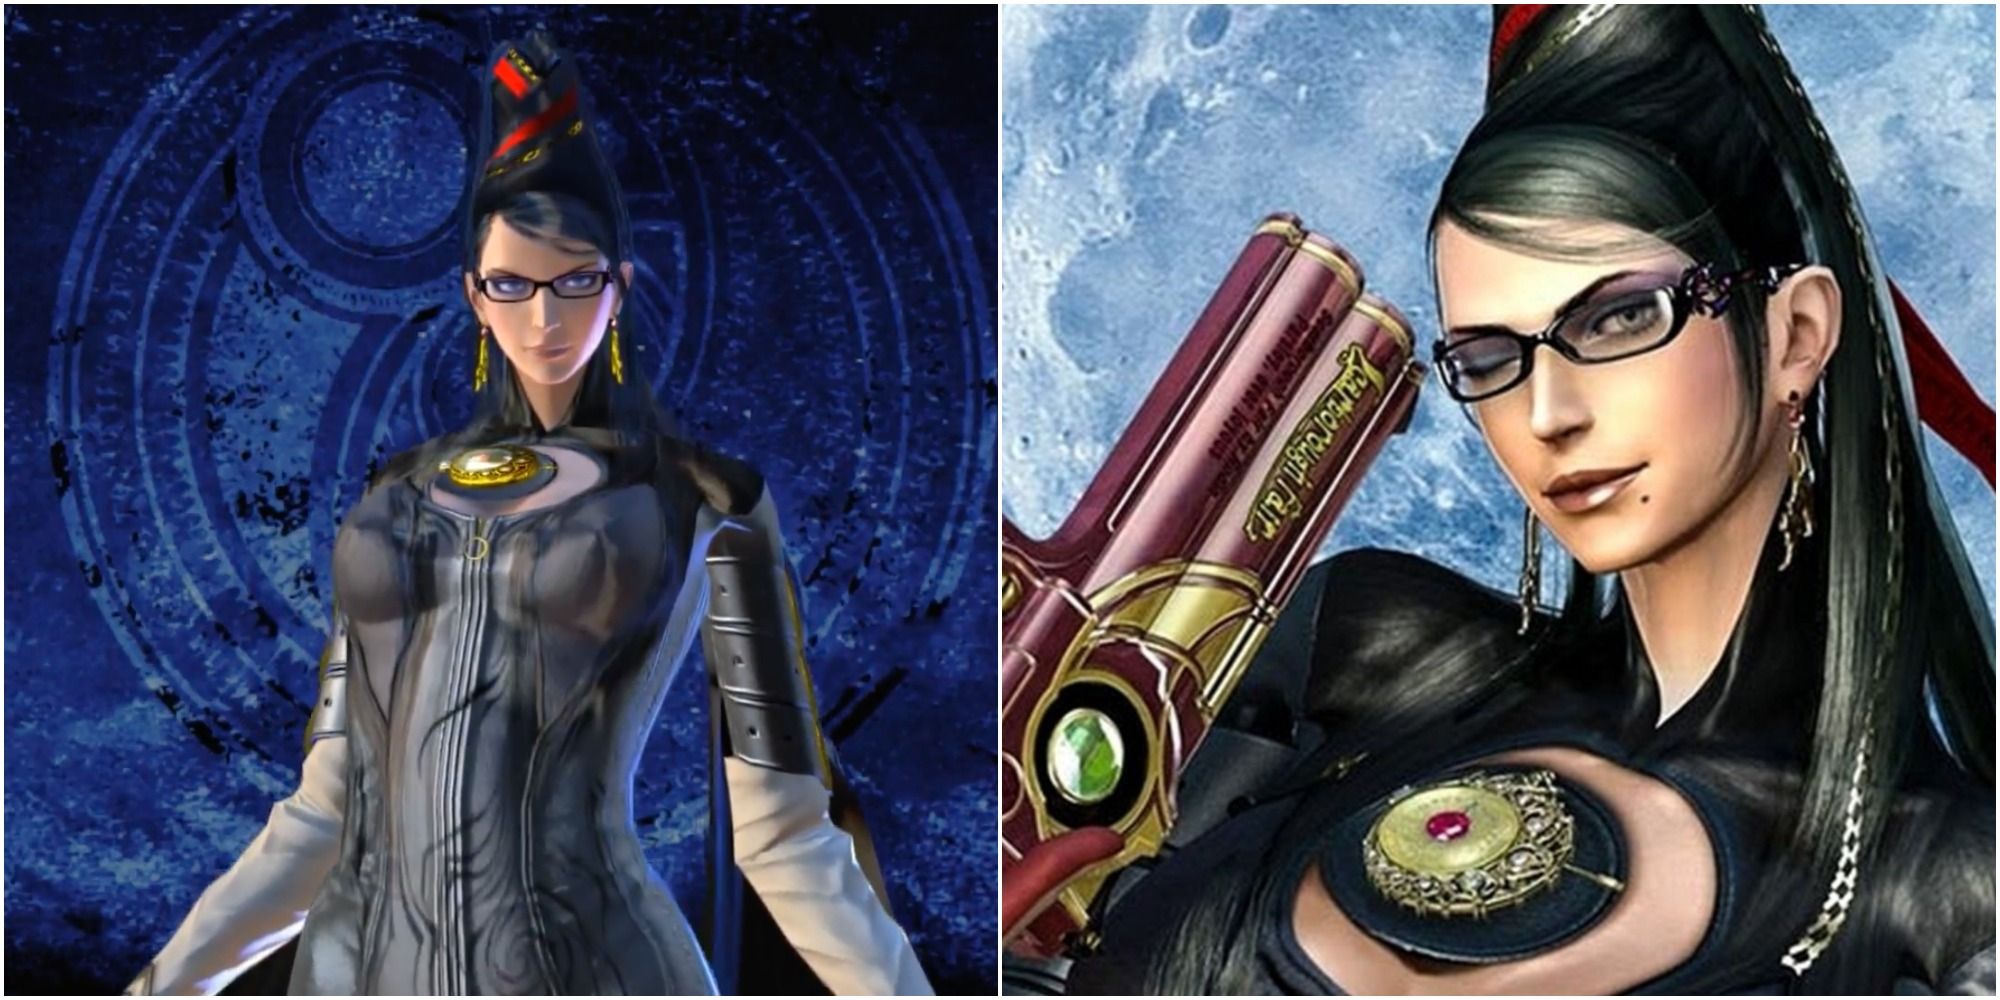 Bayonetta default outfit A Witch With No Memories Bayonetta 2